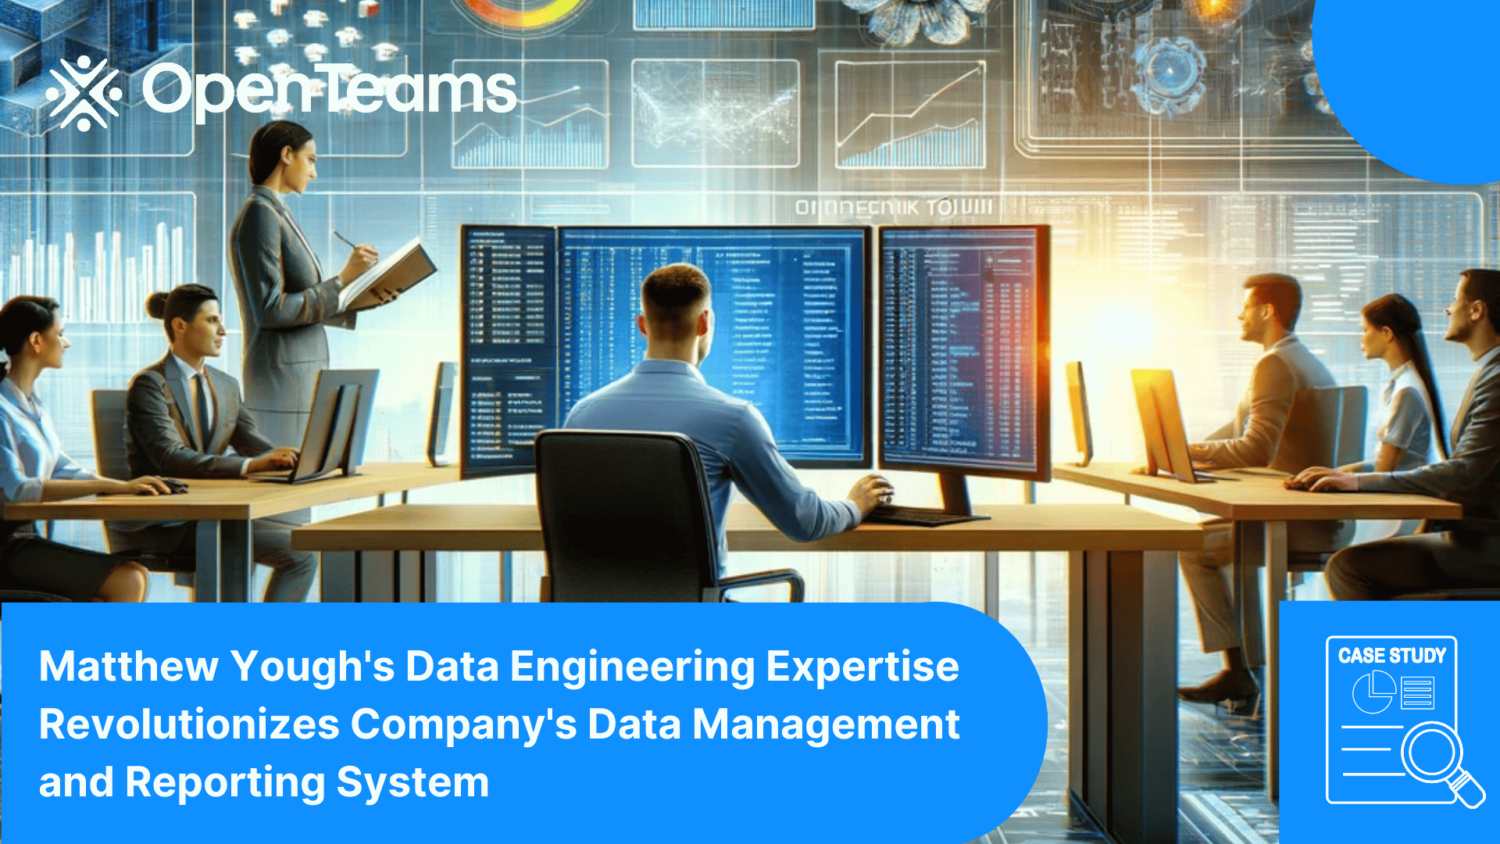 Matthew Yough’s Data Engineering Expertise Revolutionizes Company’s Data Management and Reporting System